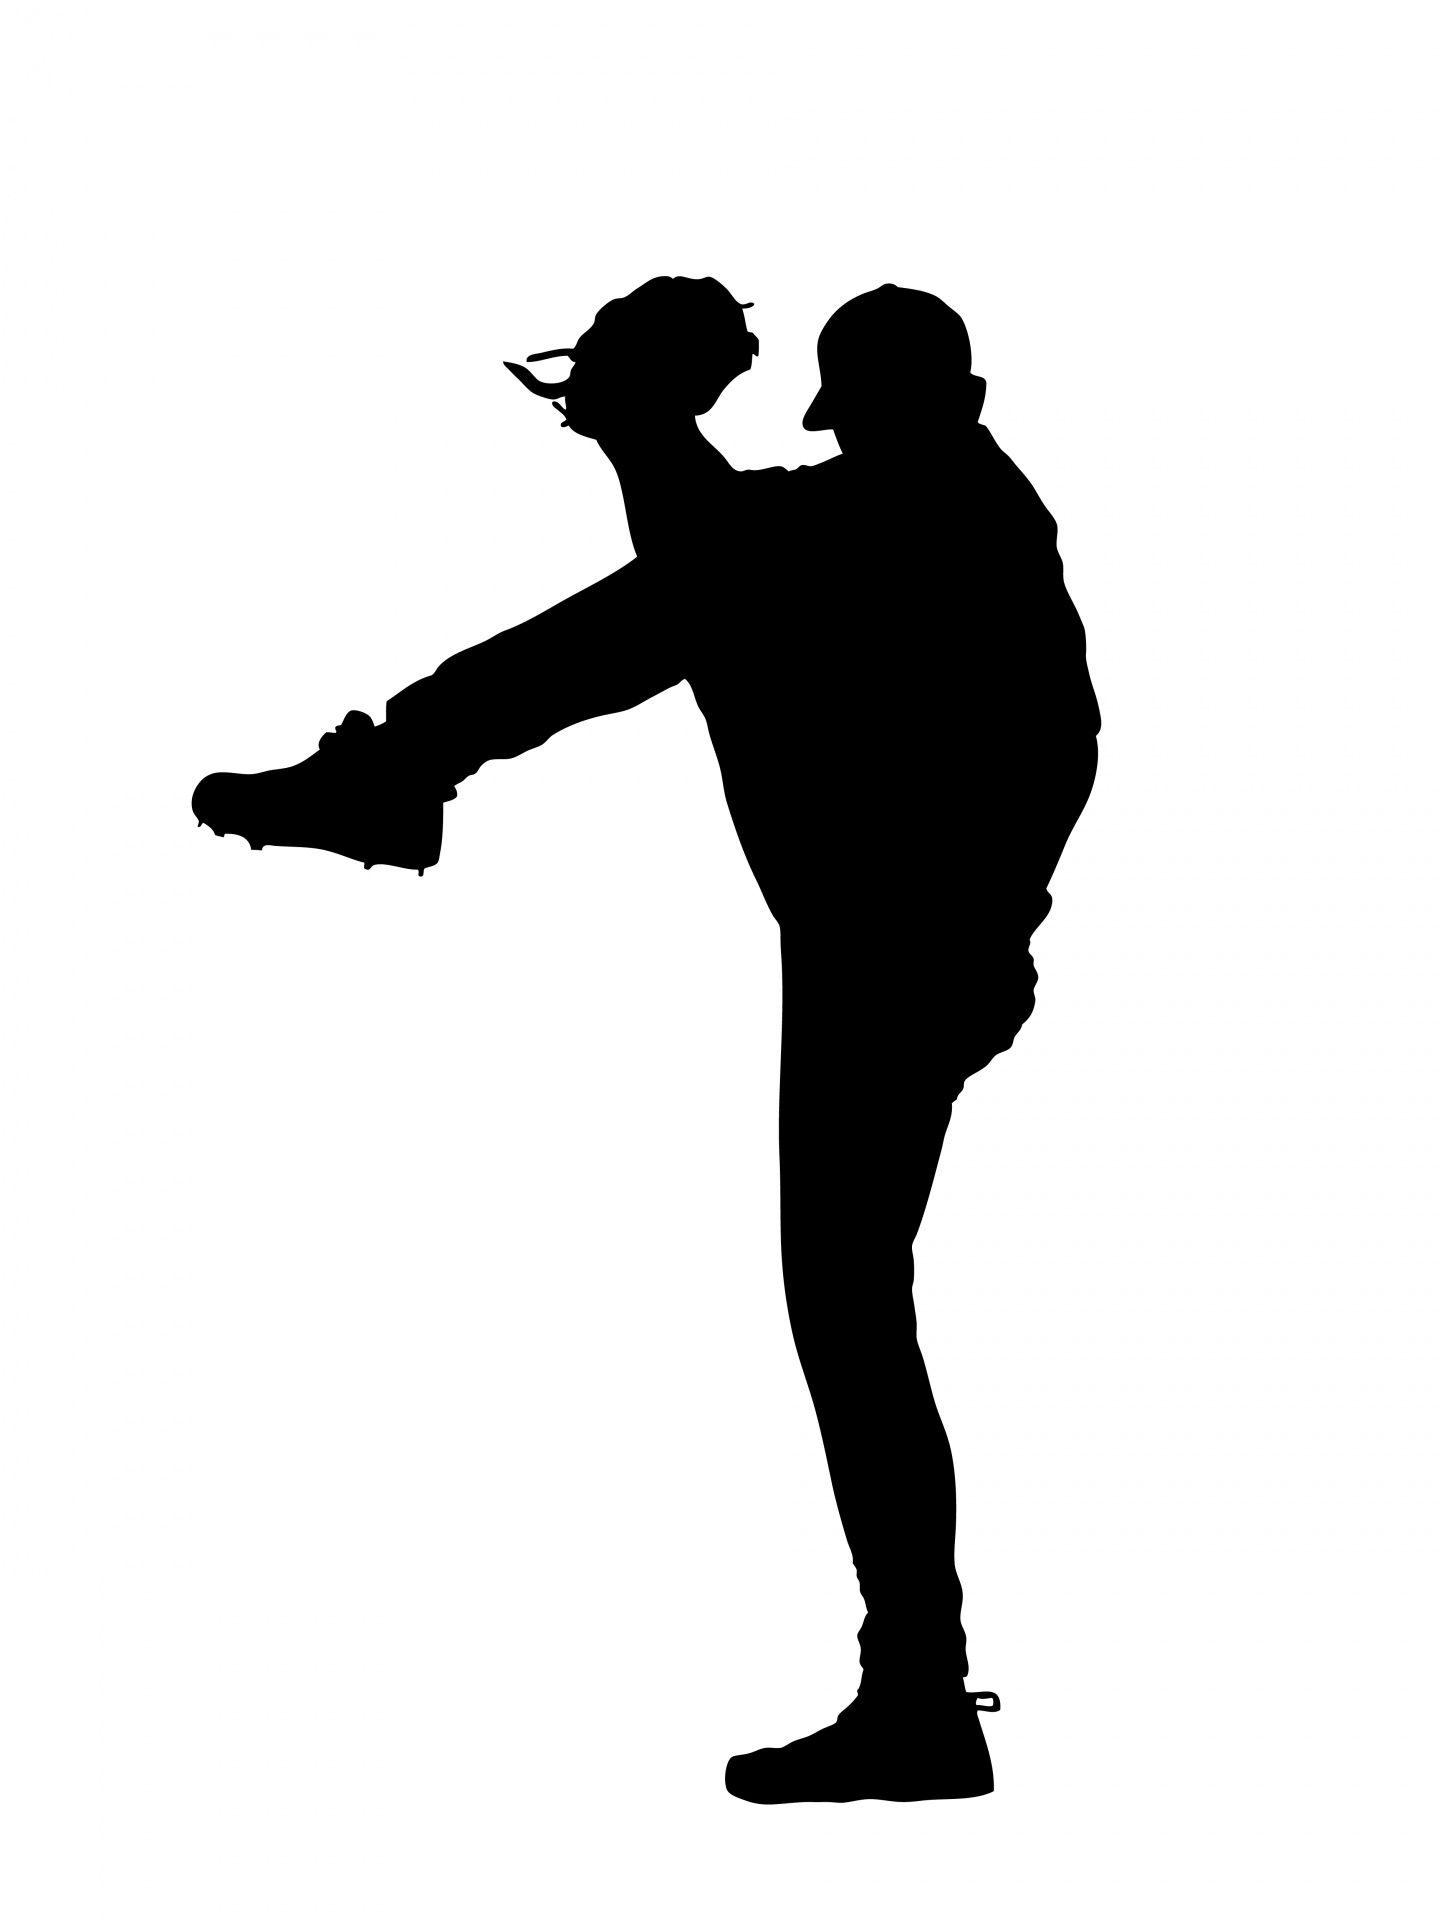 Black silhouette of a baseball pitcher on white background clipart